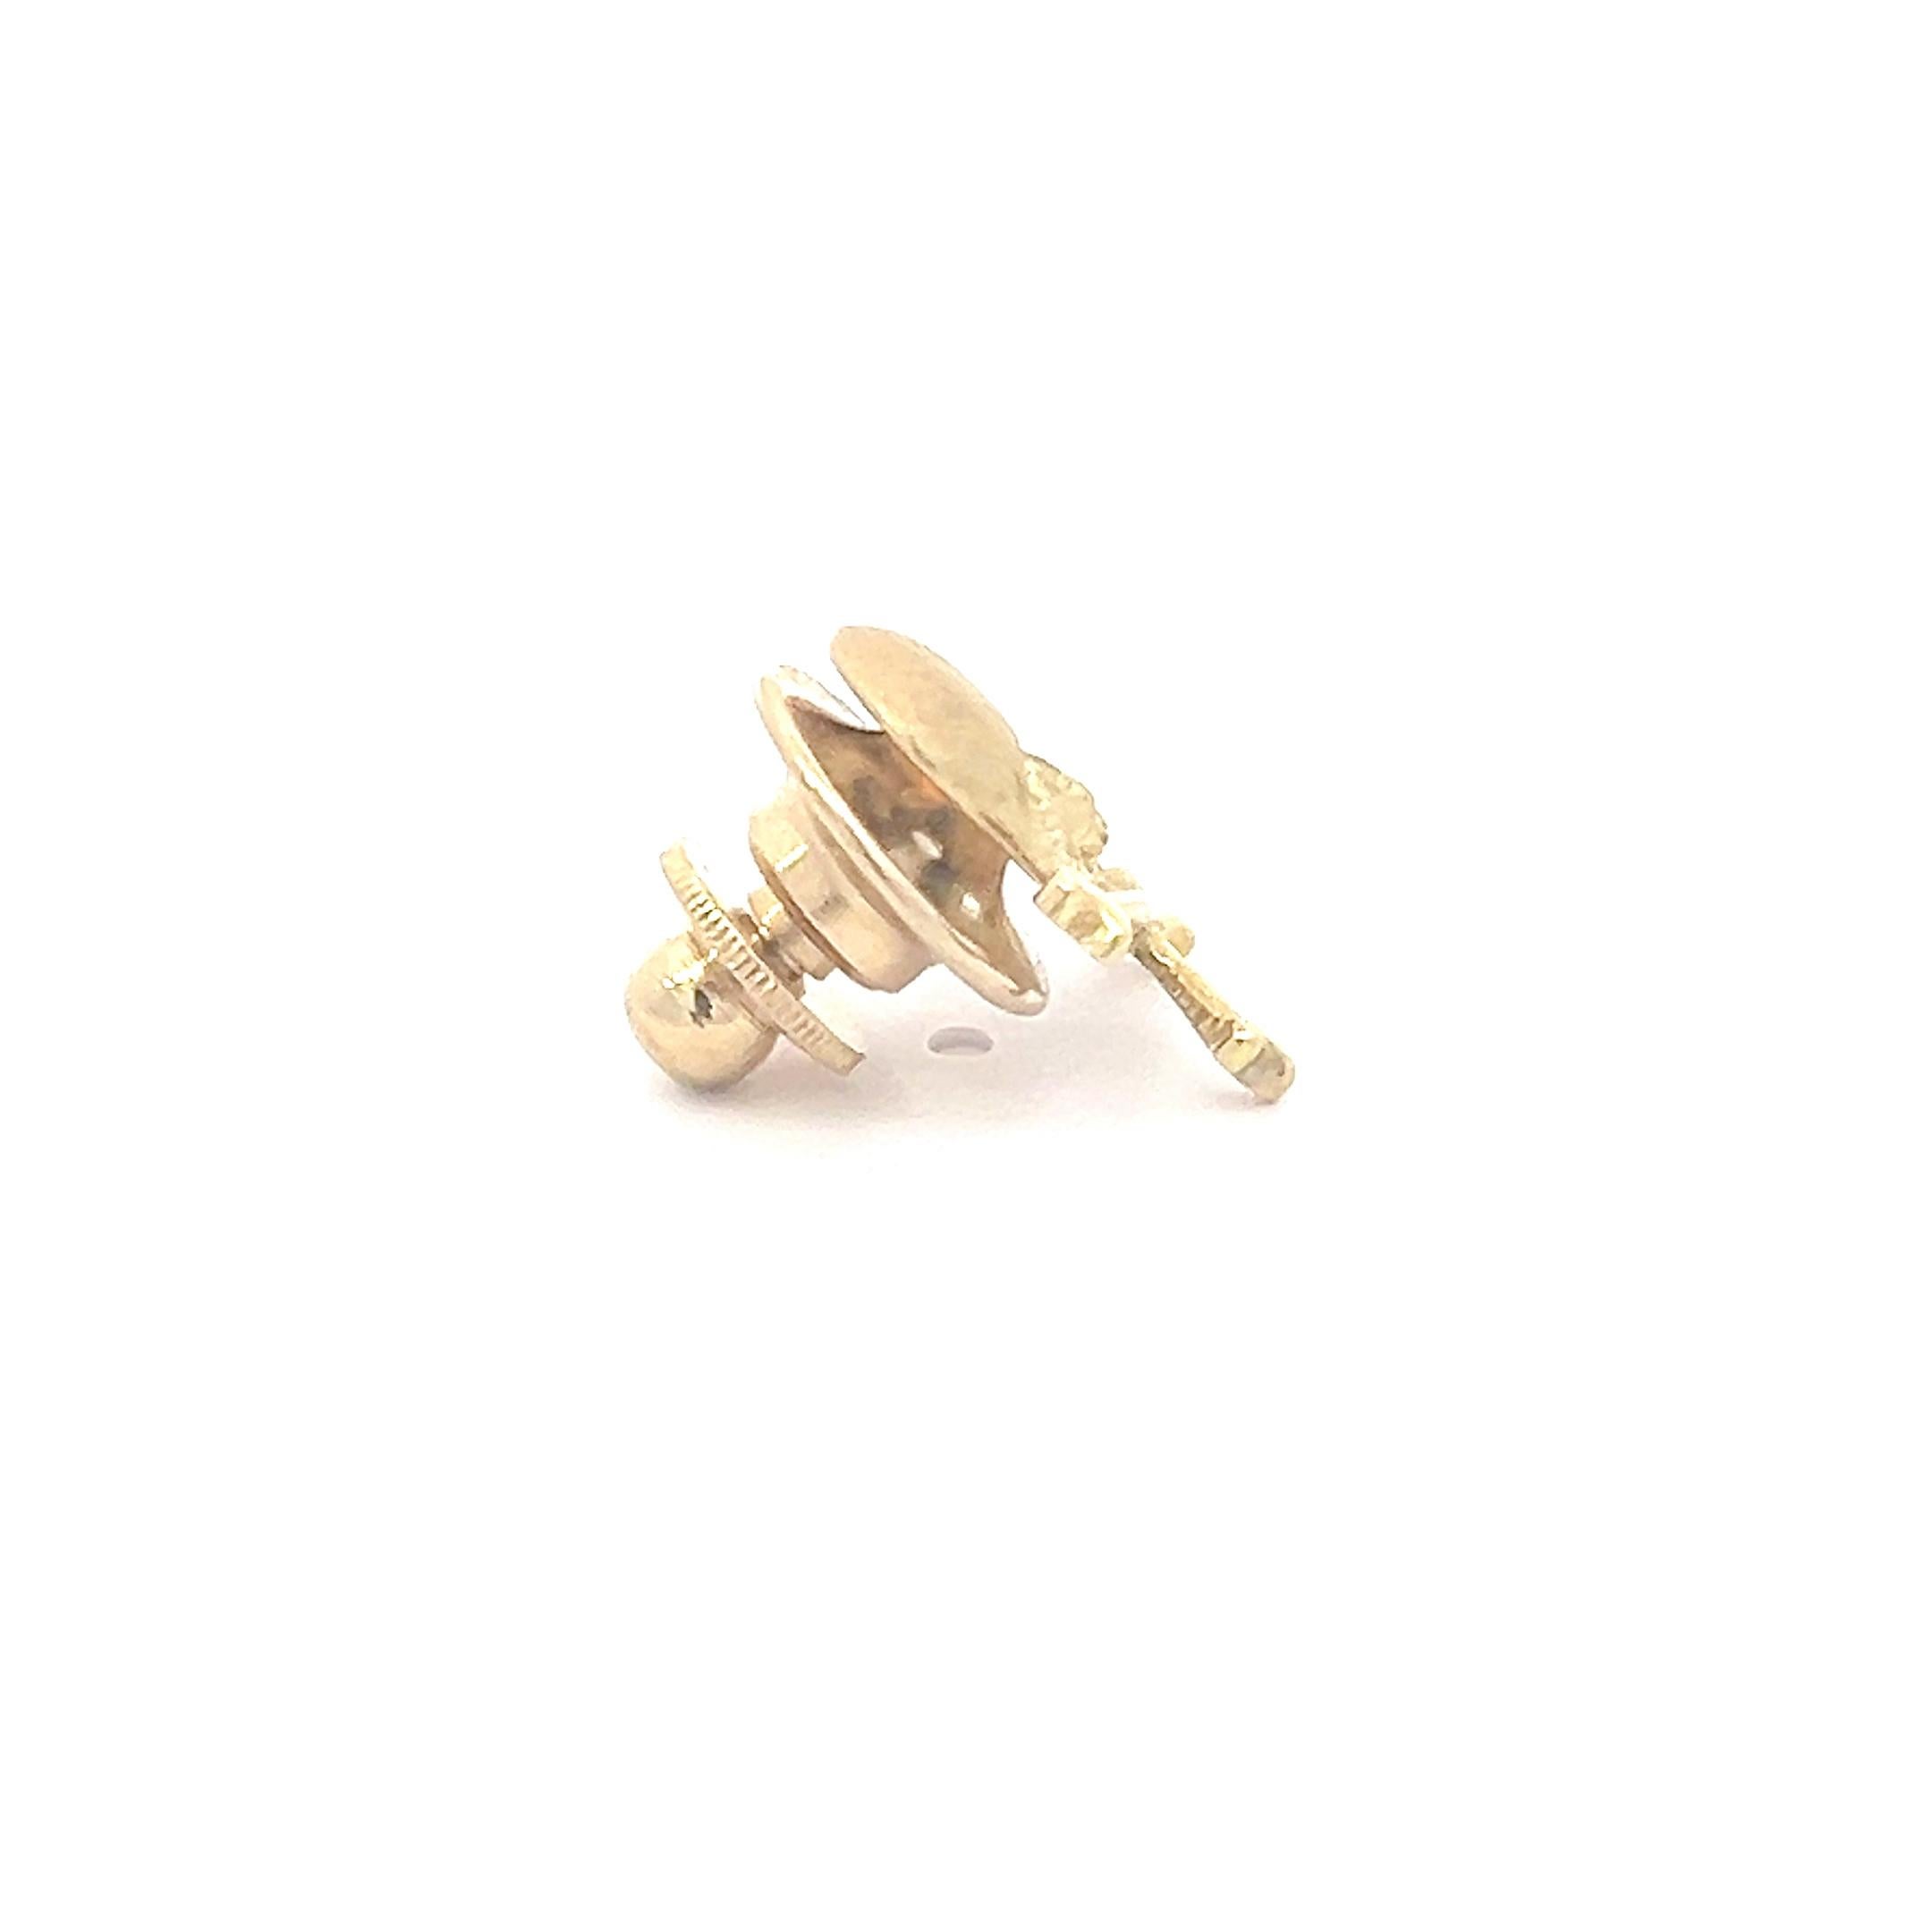 Make a bold statement with our 18k Yellow Gold Skull and Bones Lapel Pin/Tie Tack, a fusion of edgy style and luxury. Expertly crafted, this accessory features a detailed skull and crossed bones design in radiant 18k yellow gold, creating a